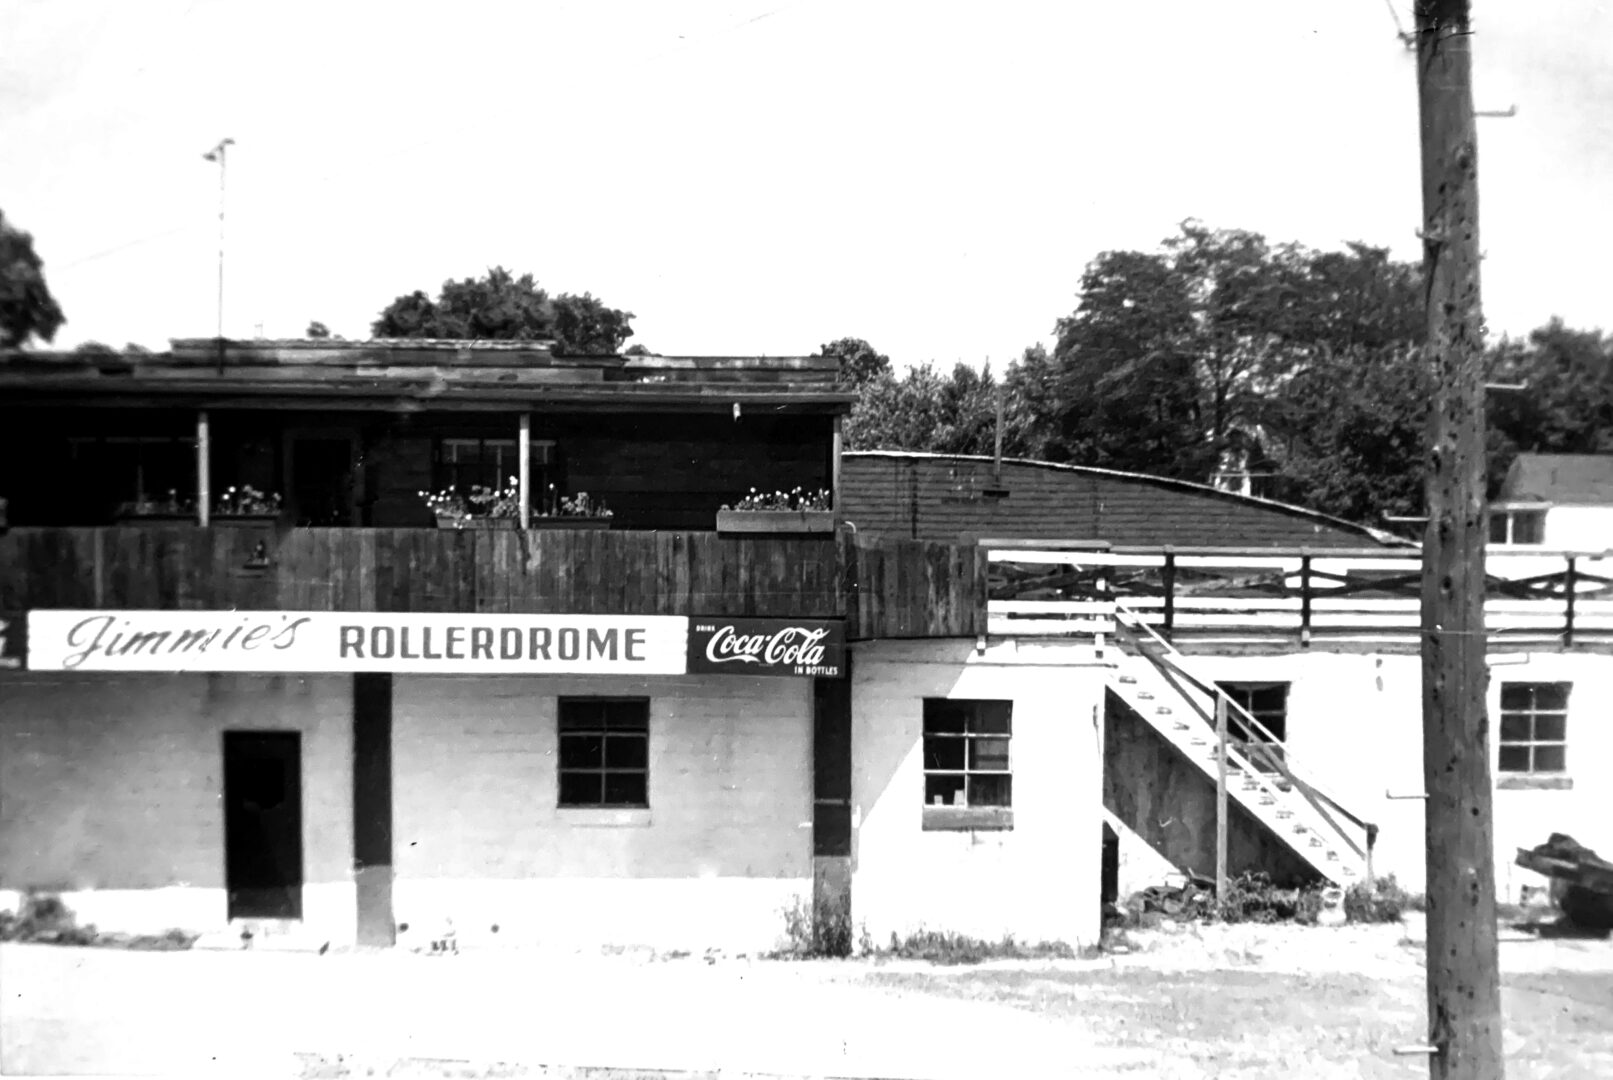 Jimmie's Rollerdrome